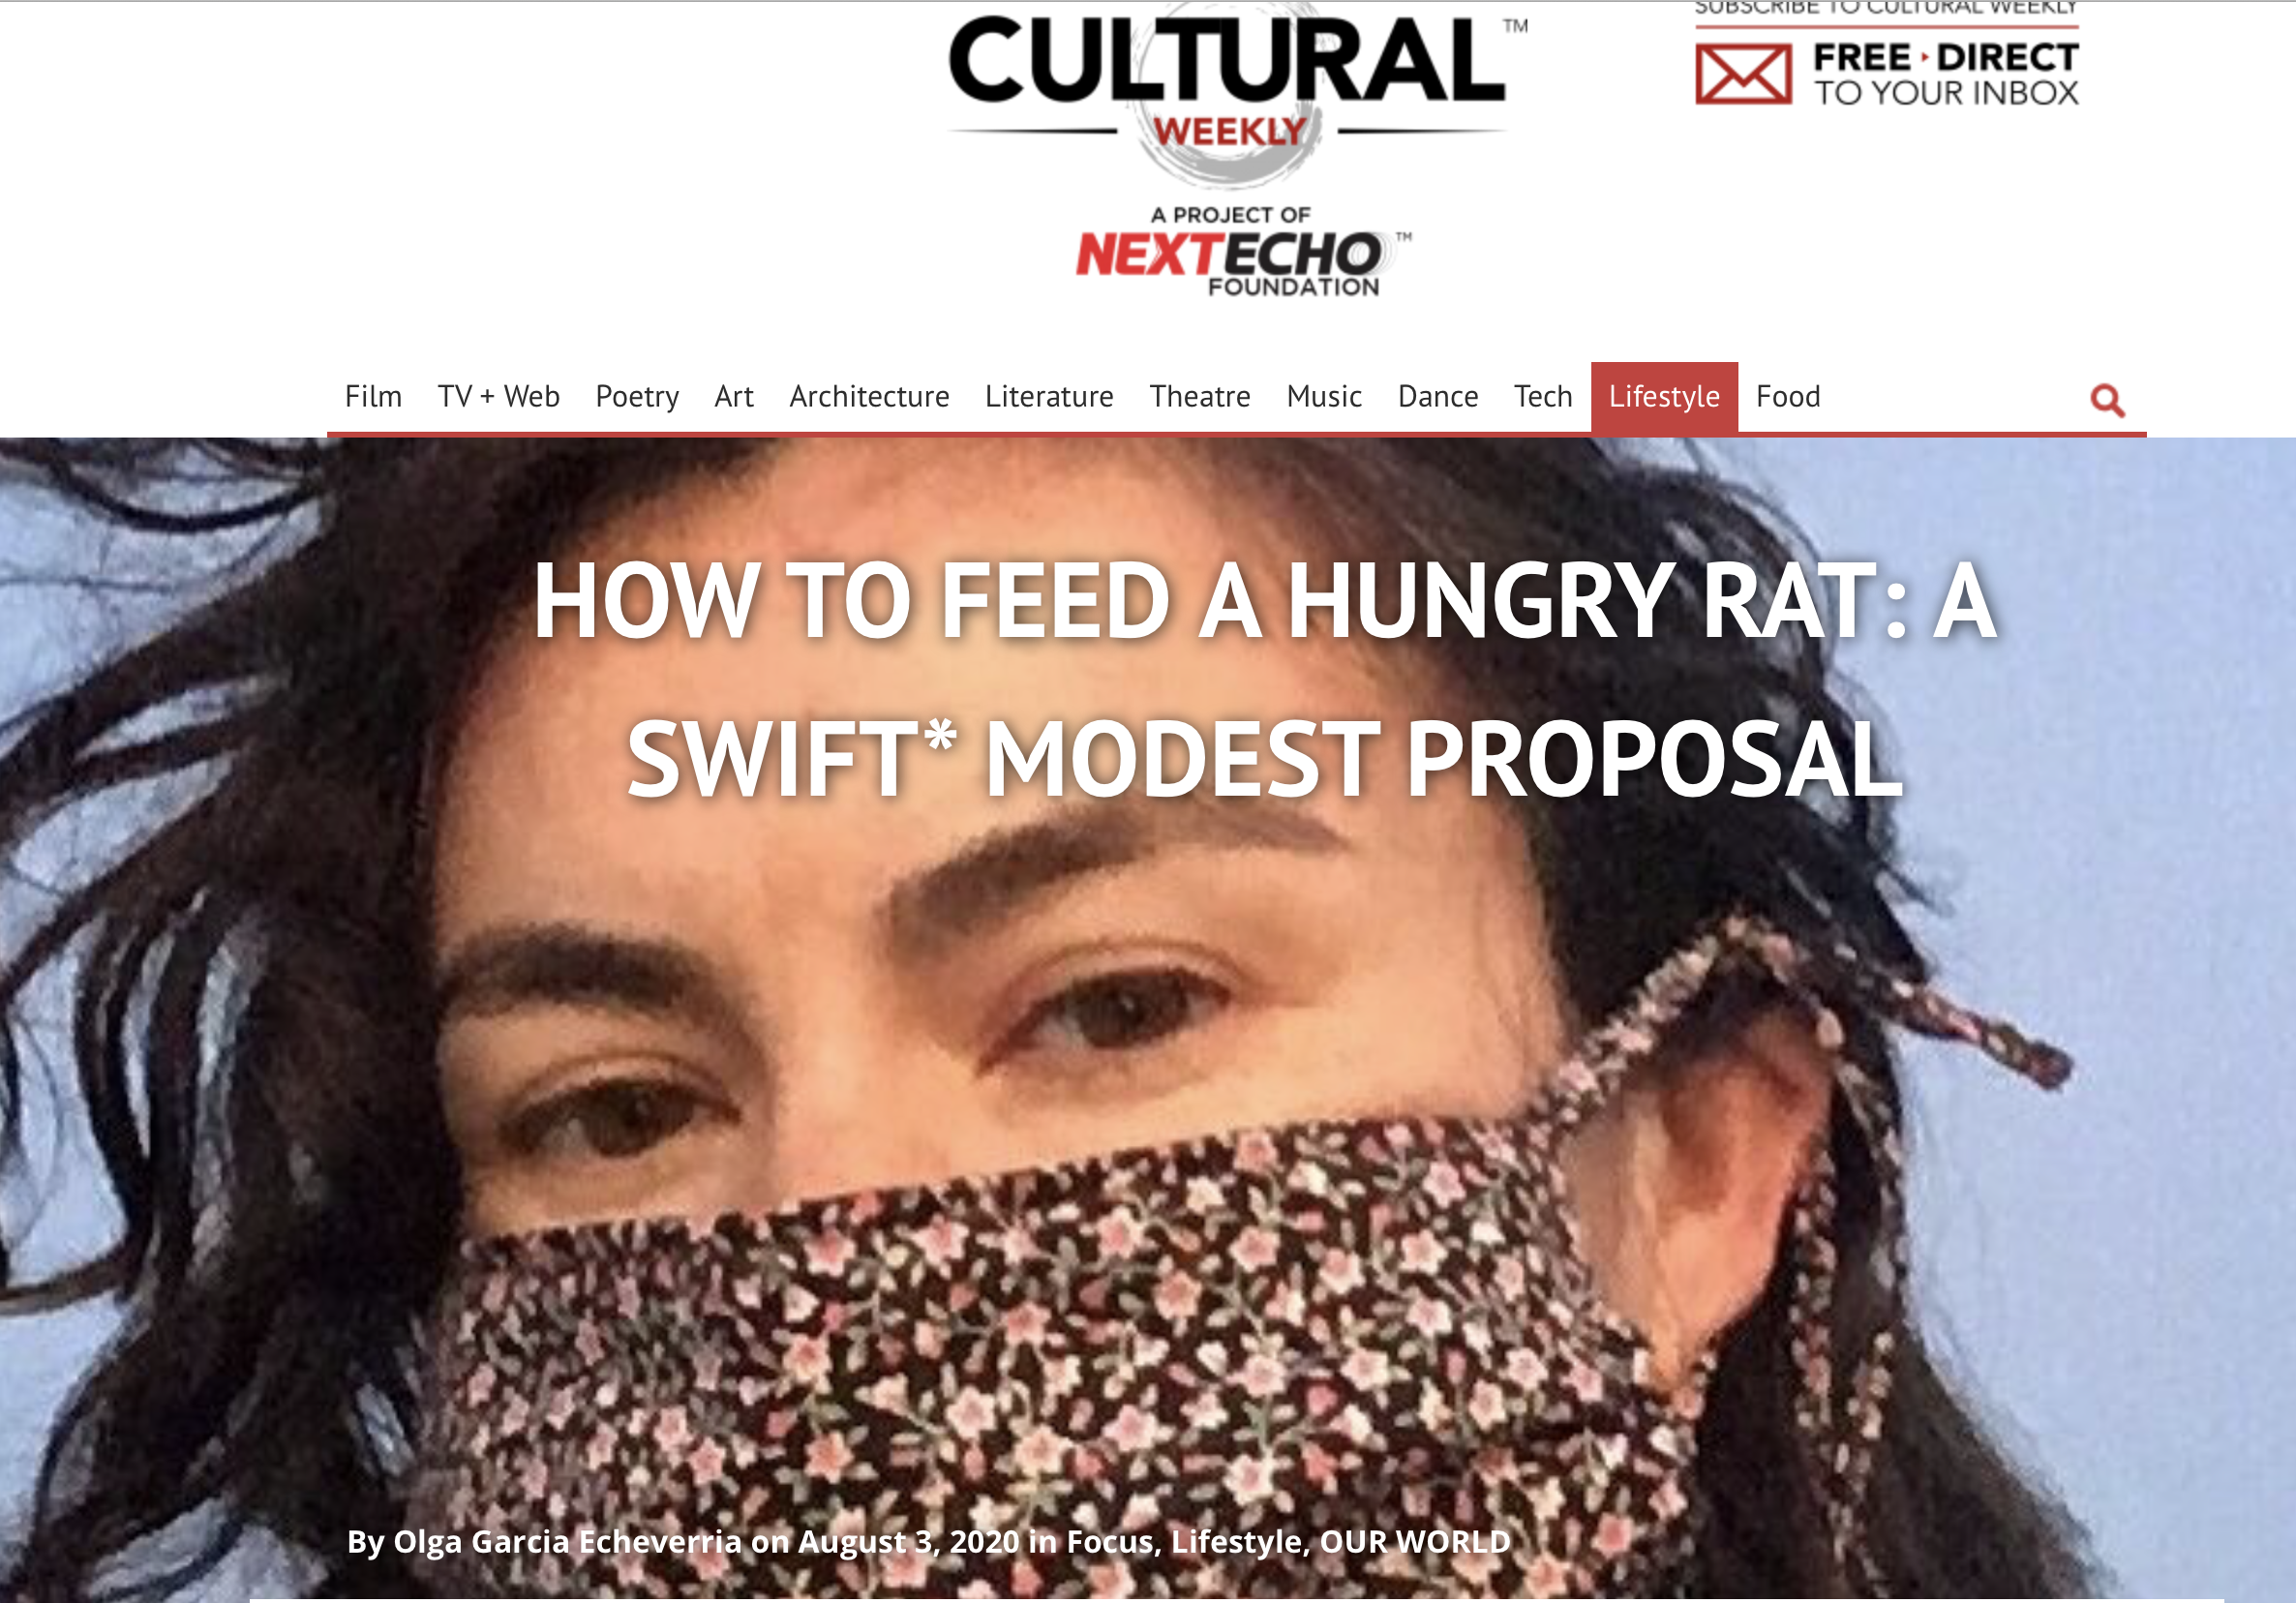 HOW TO FEED A HUNGRY RAT: A SWIFT* MODEST PROPOSAL